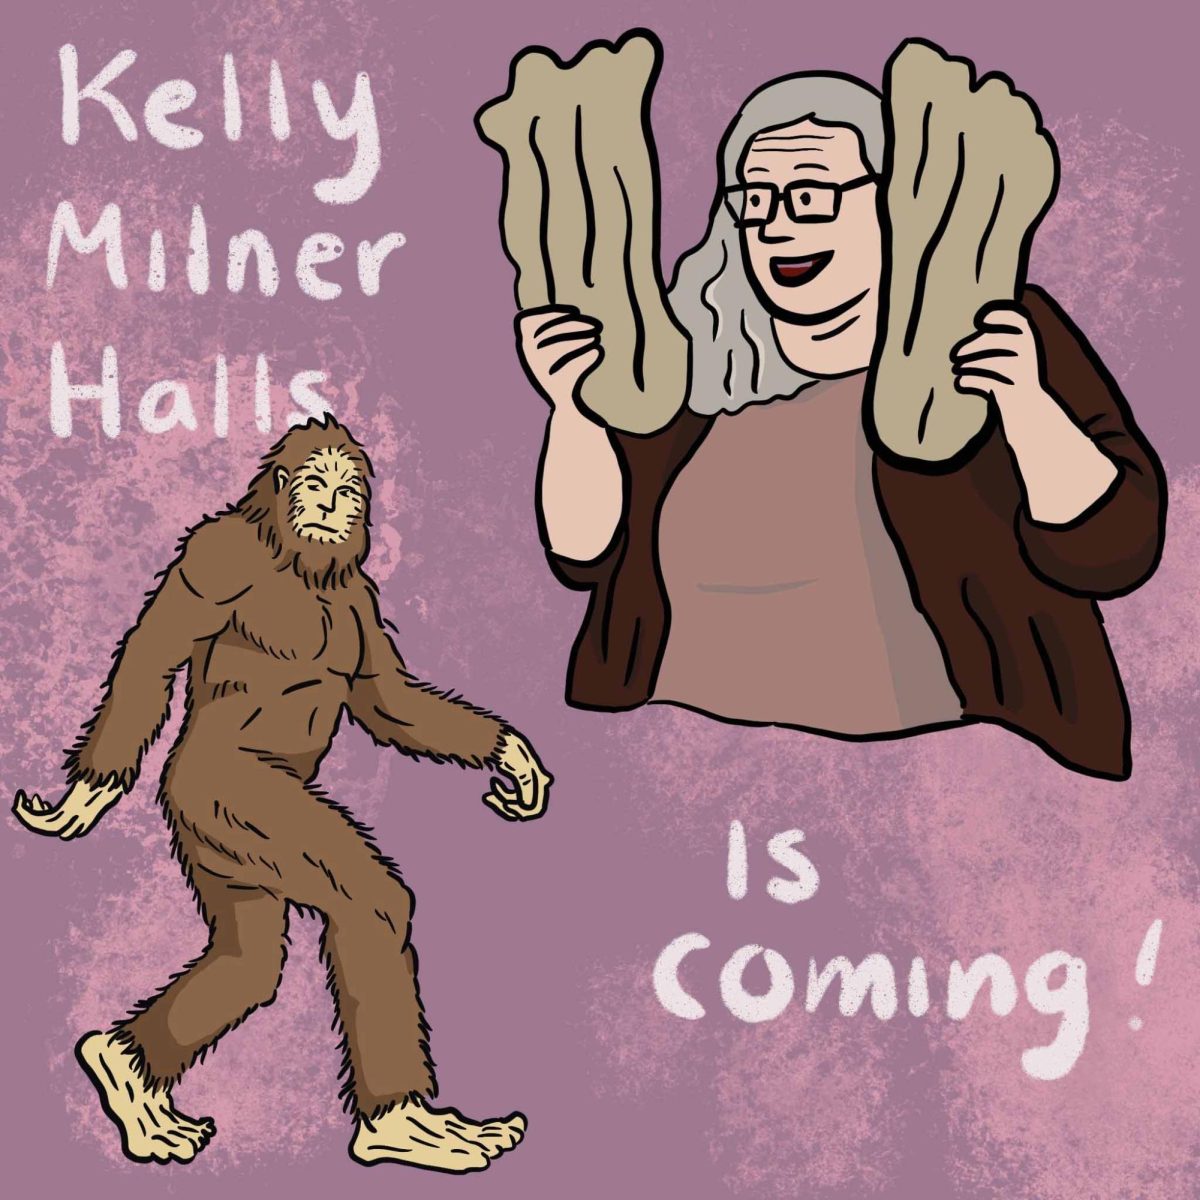 Local+childrens+author+Kelly+Milner+Halls+is+presenting+on+cryptozoology+and+Bigfoot.